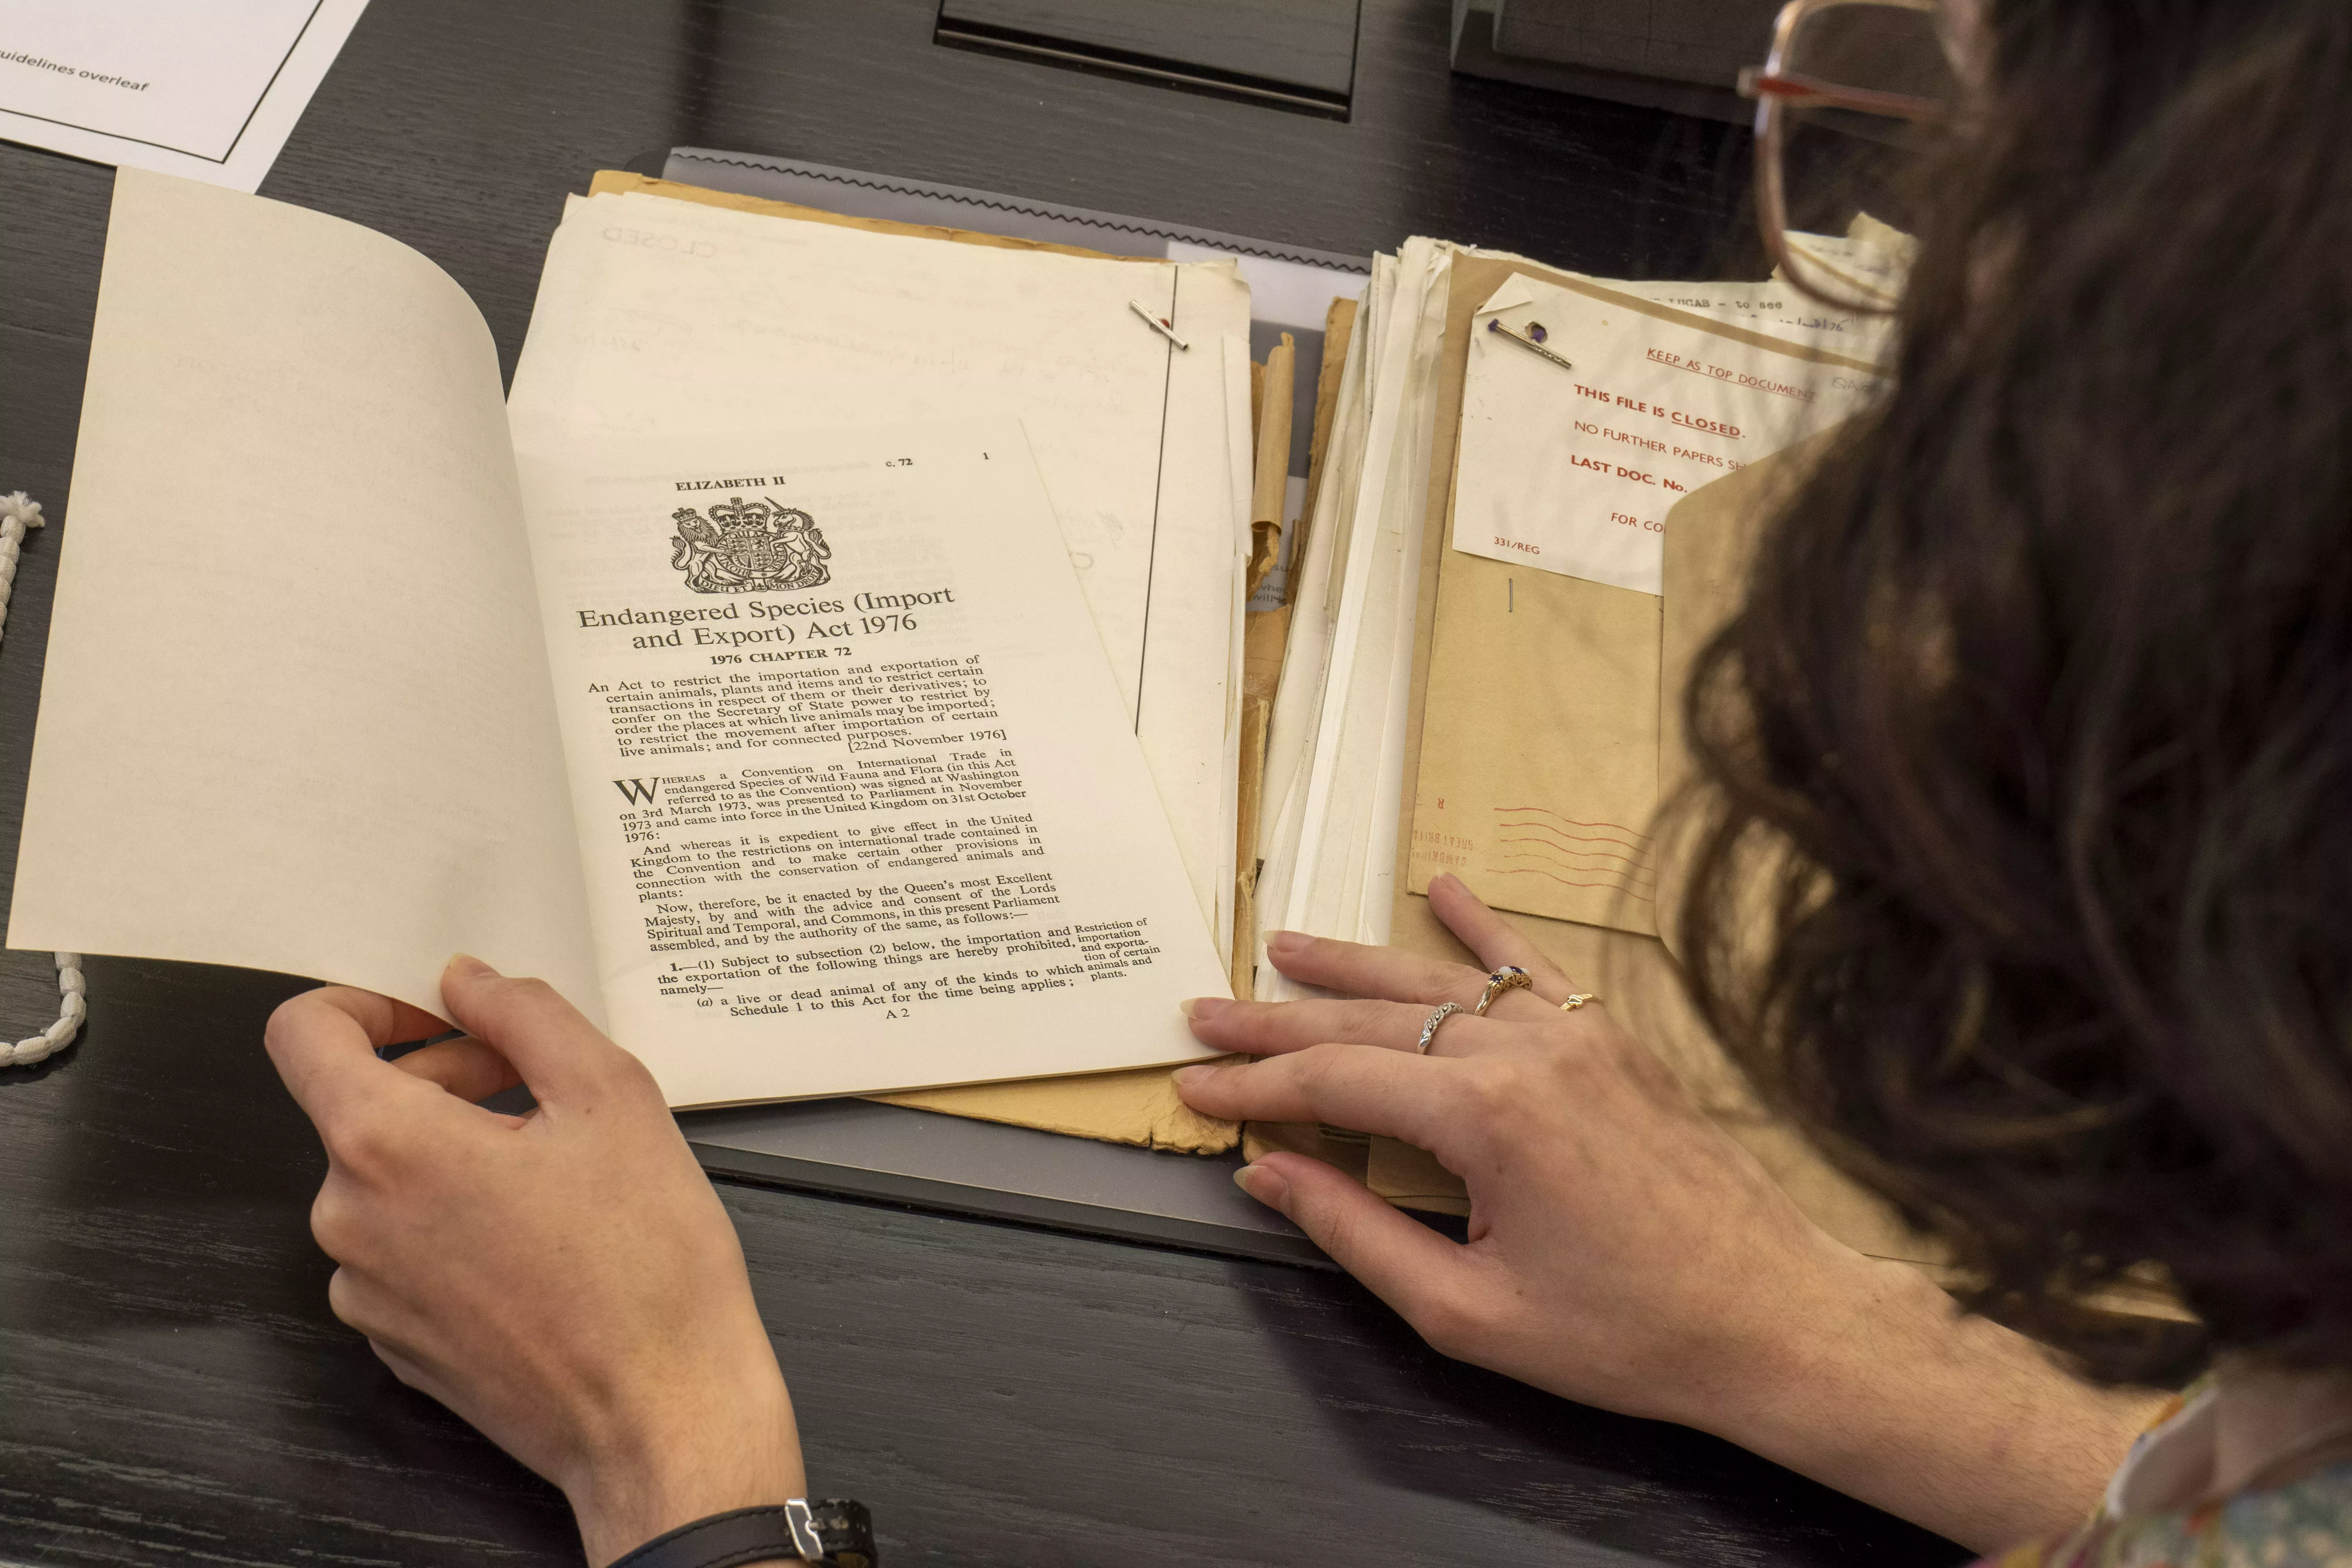 A woman is looking at some old records from the 70s, a small pamphlet is labelled "Endangered Species Act 1976"